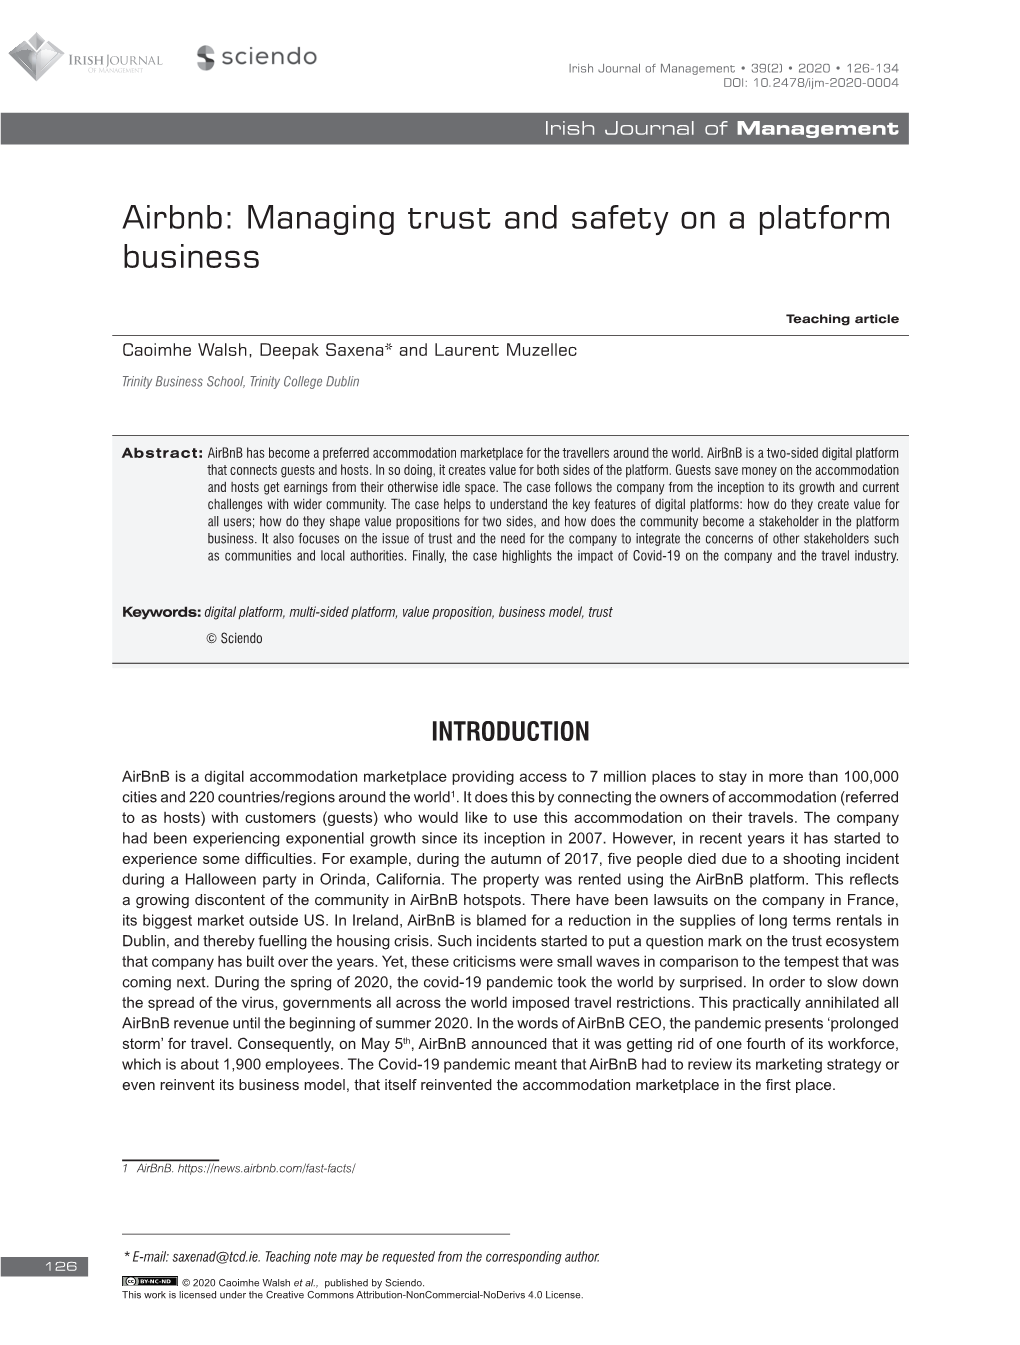 Airbnb: Managing Trust and Safety on a Platform Business